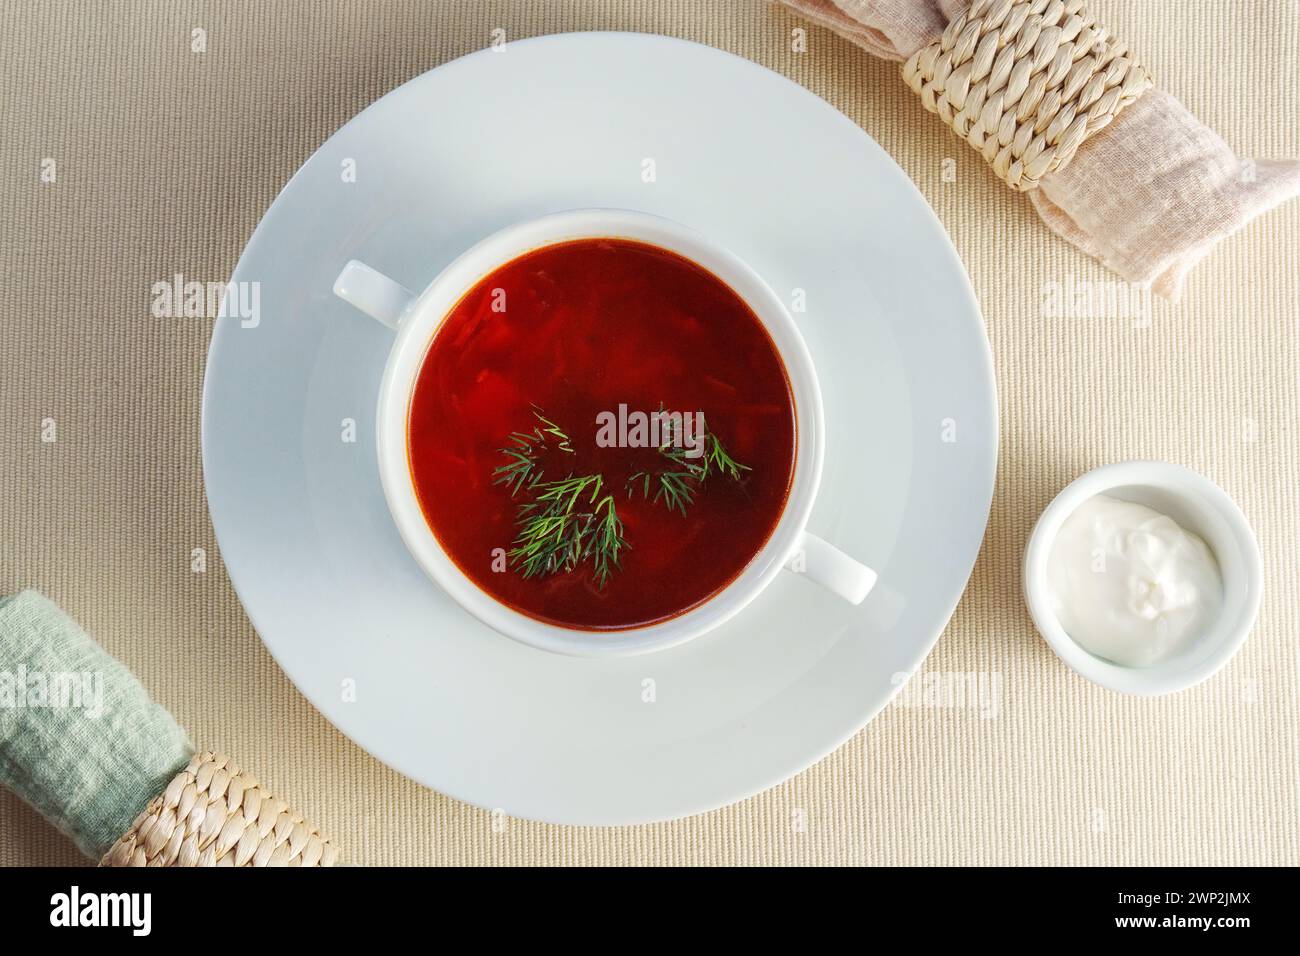 Presented bowl of creamy tomato bisque soup, adorned with a gleaming silver spoon. Stock Photo